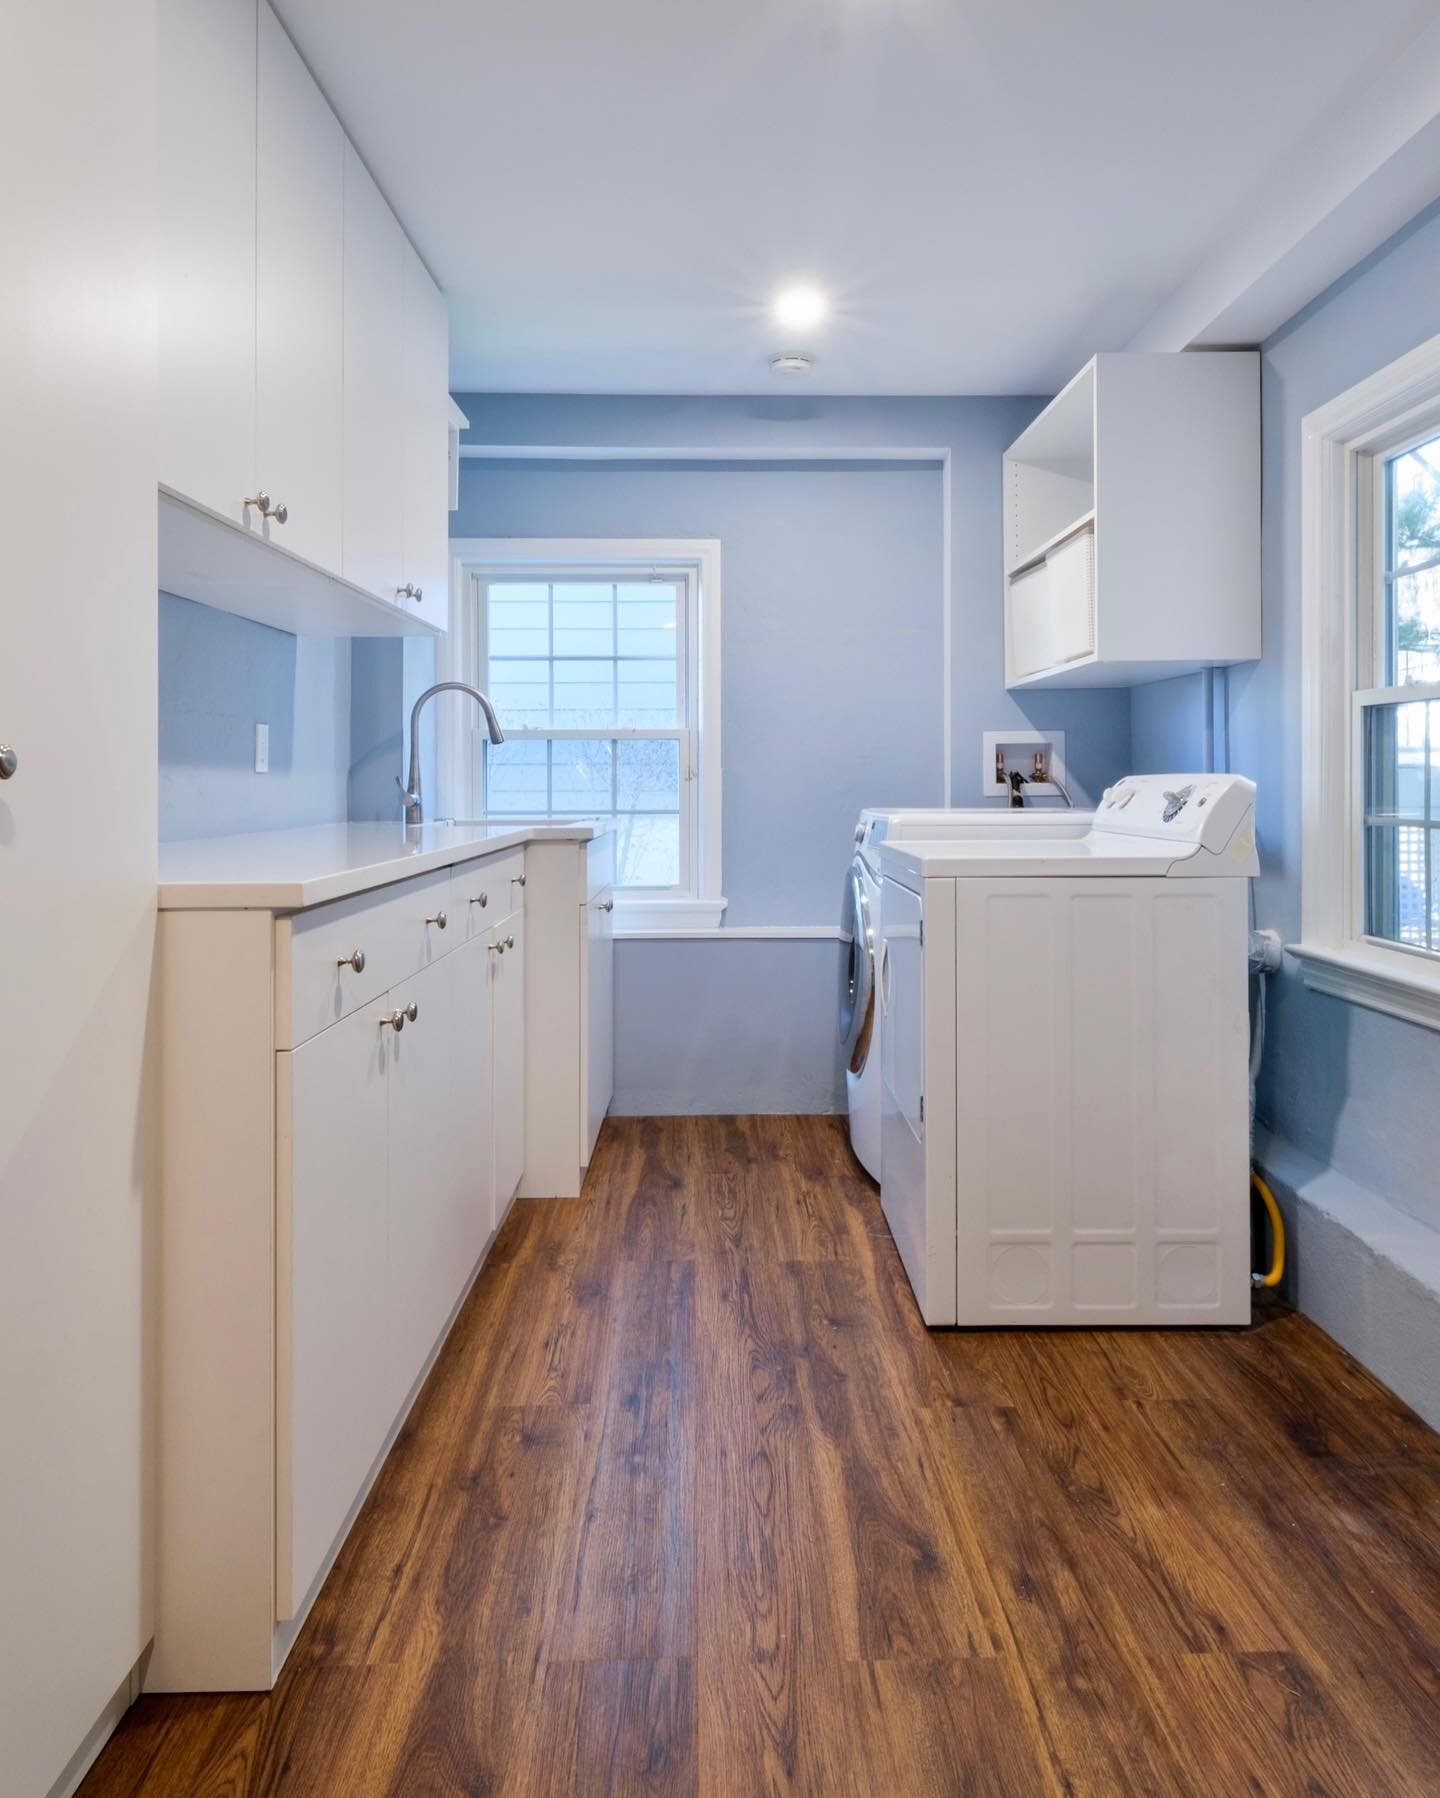 If you&rsquo;re going to spend some of the weekend here, you might as well make it beautiful!  #laundryroom #larchmontmoms #weekendvibes #laundry #design #momlife #larchmont